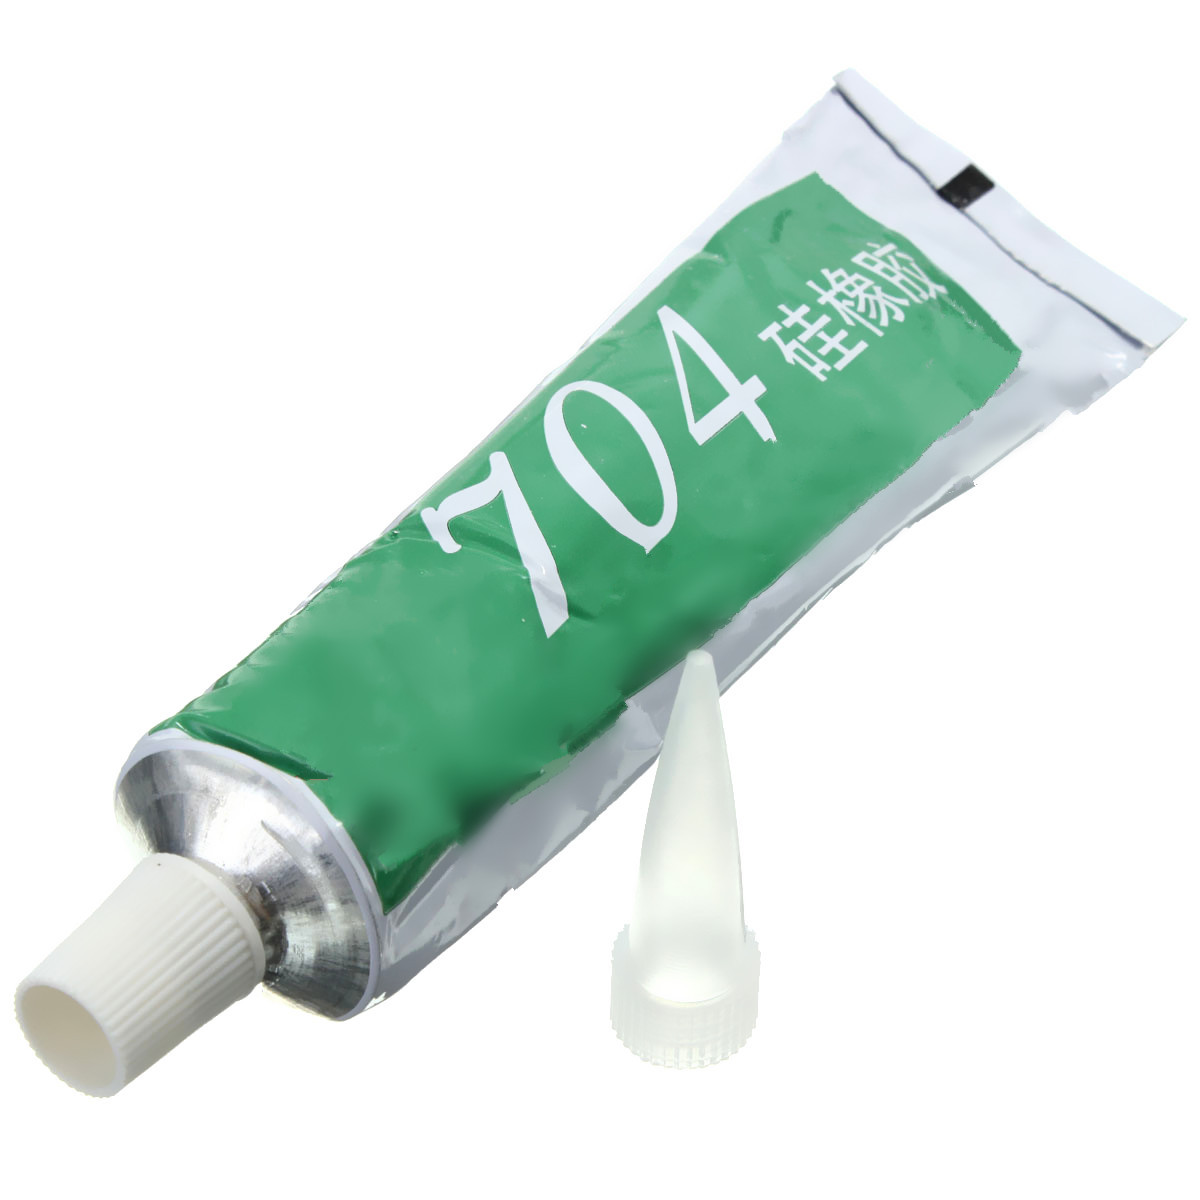 

45g High Temperature 704 Electronic Devices Silicone Rubber Adhesive Sealant Glue